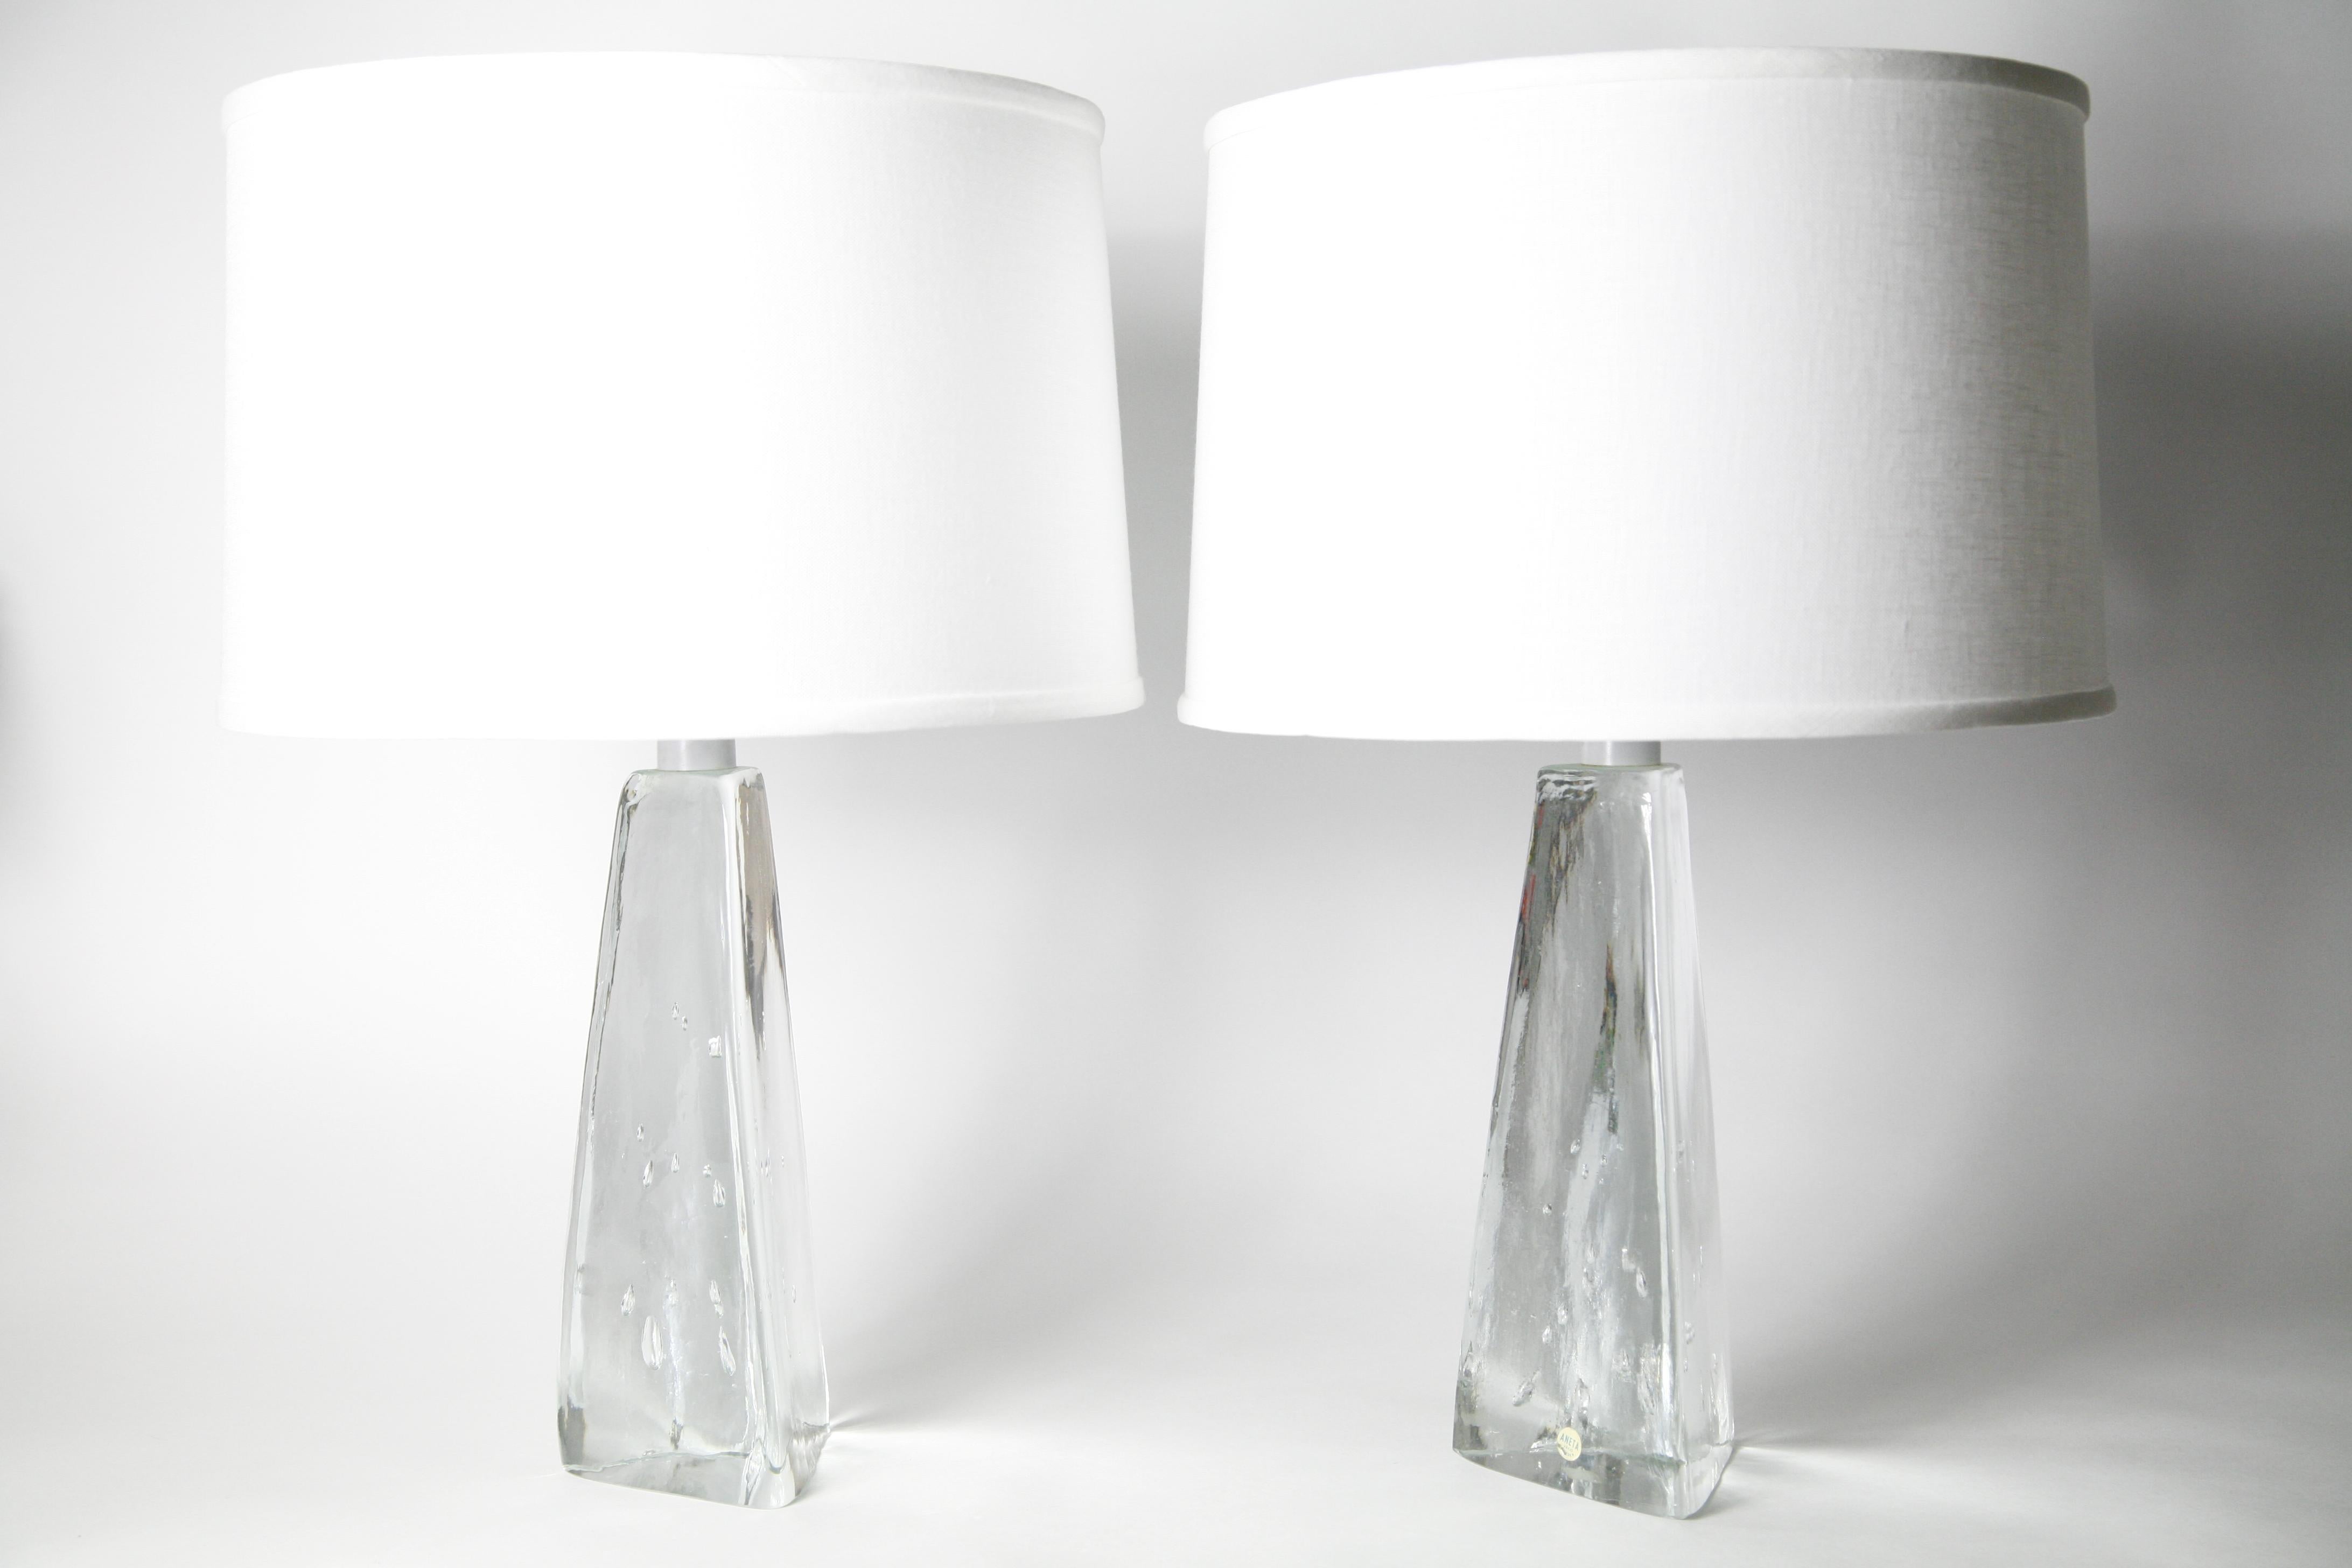 Hand-Crafted Pair of Triangular Solid Clear Aneta Lamps, Sweden, 1980 For Sale